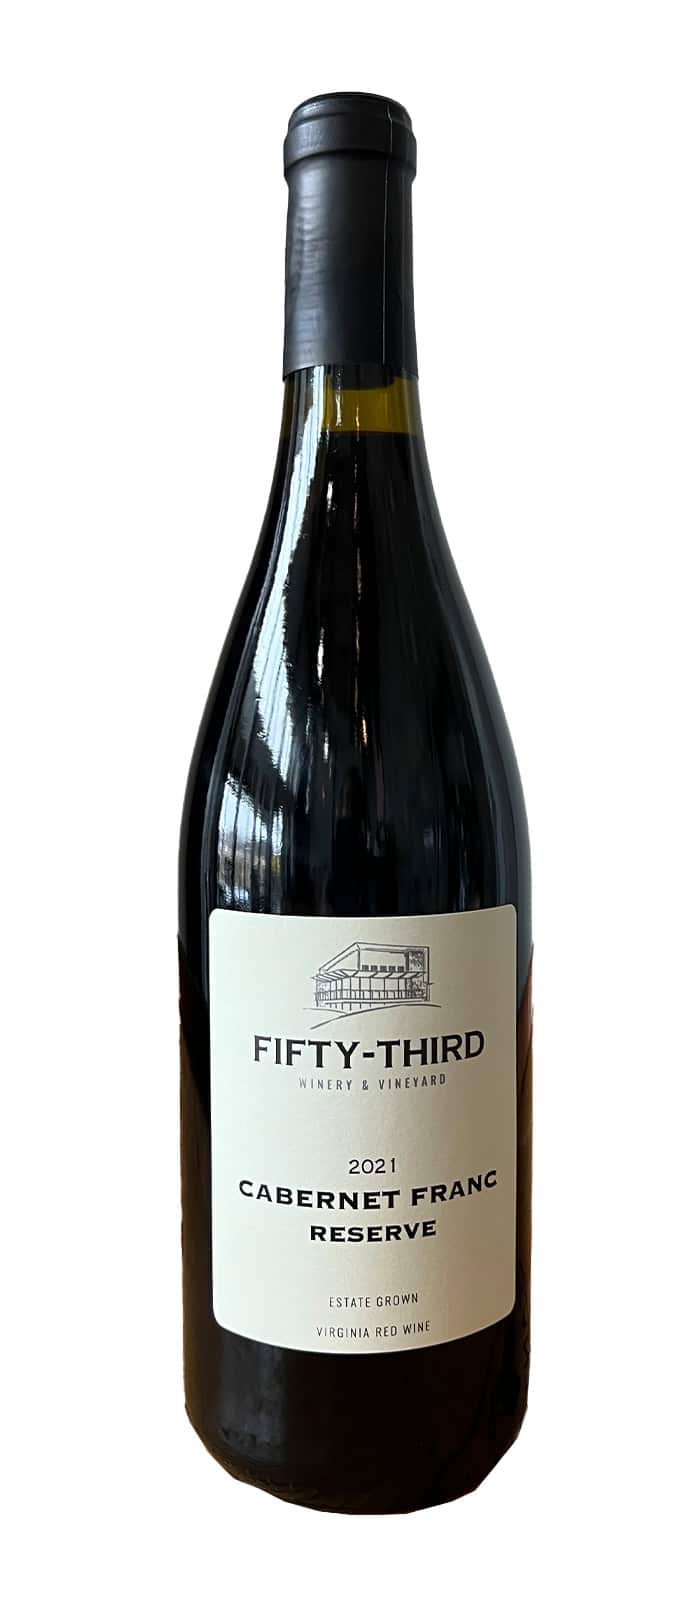 Bottle of Fifty-Third Winery & Vineyard 2021 Cabernet Franc Reserve, Gold Medal, Virginia Governor's Cup Wine Competition.